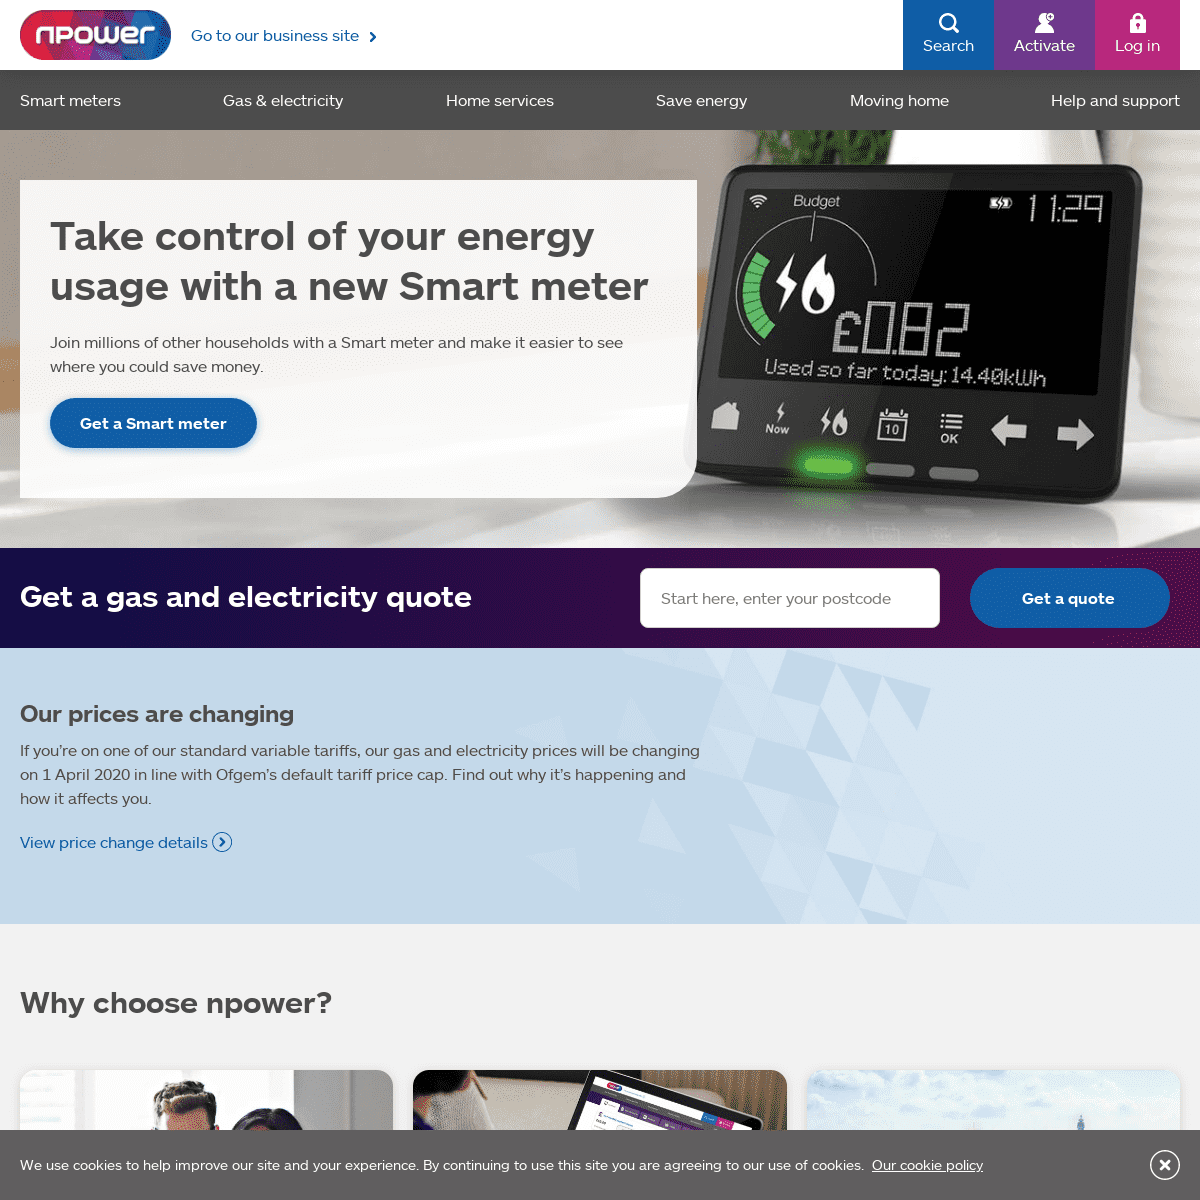 A complete backup of npower.com